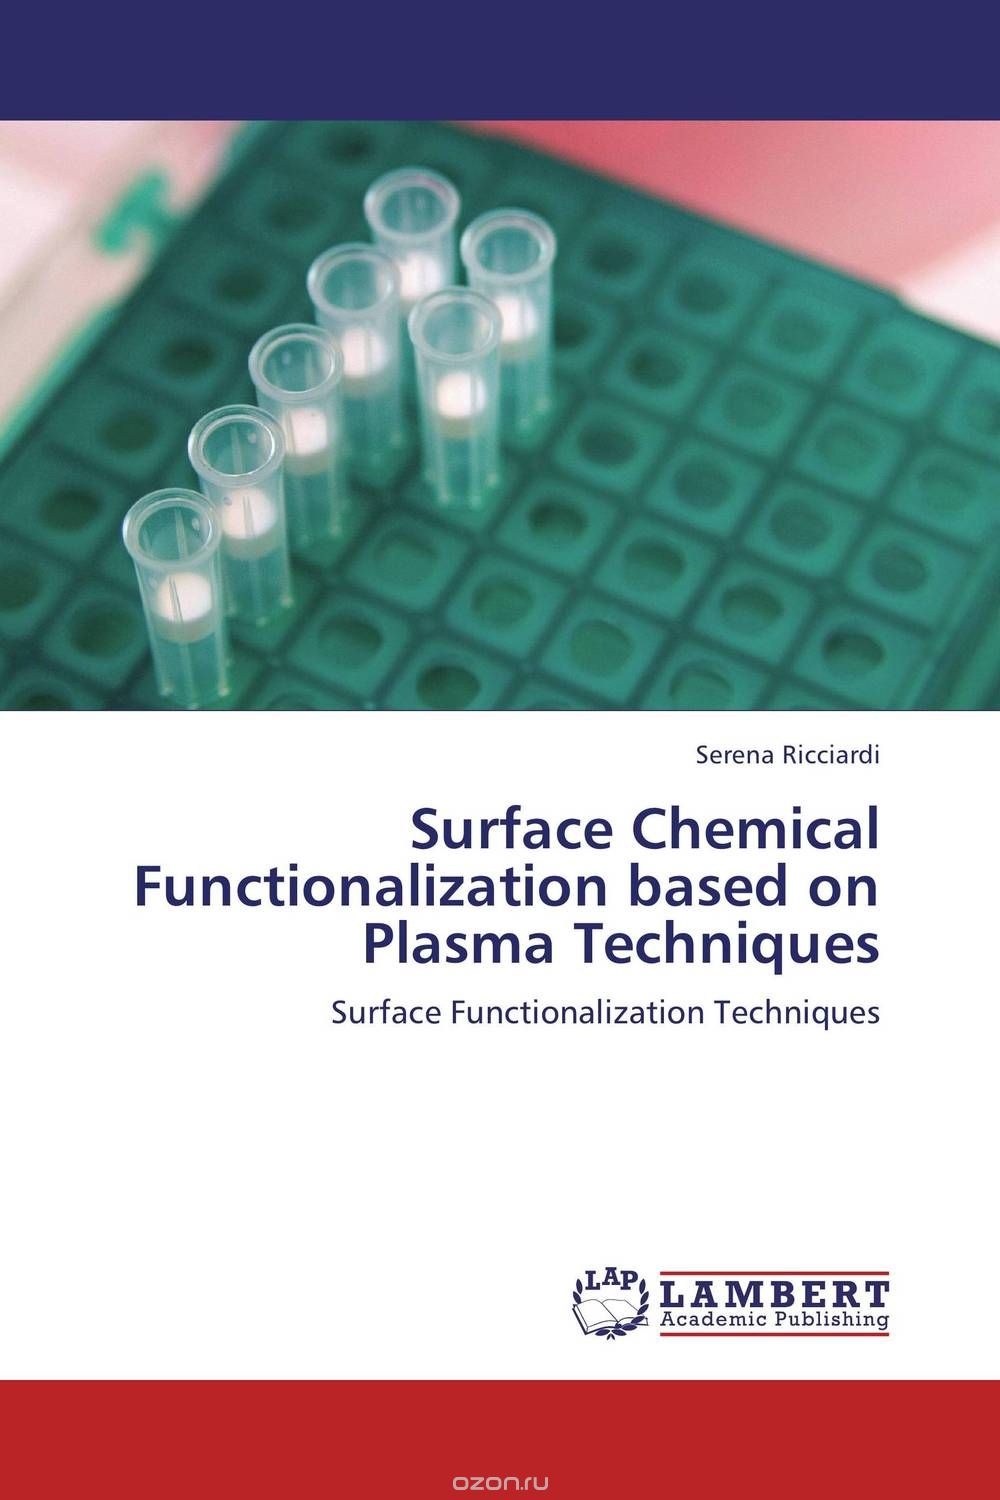 Surface Chemical Functionalization based on Plasma Techniques